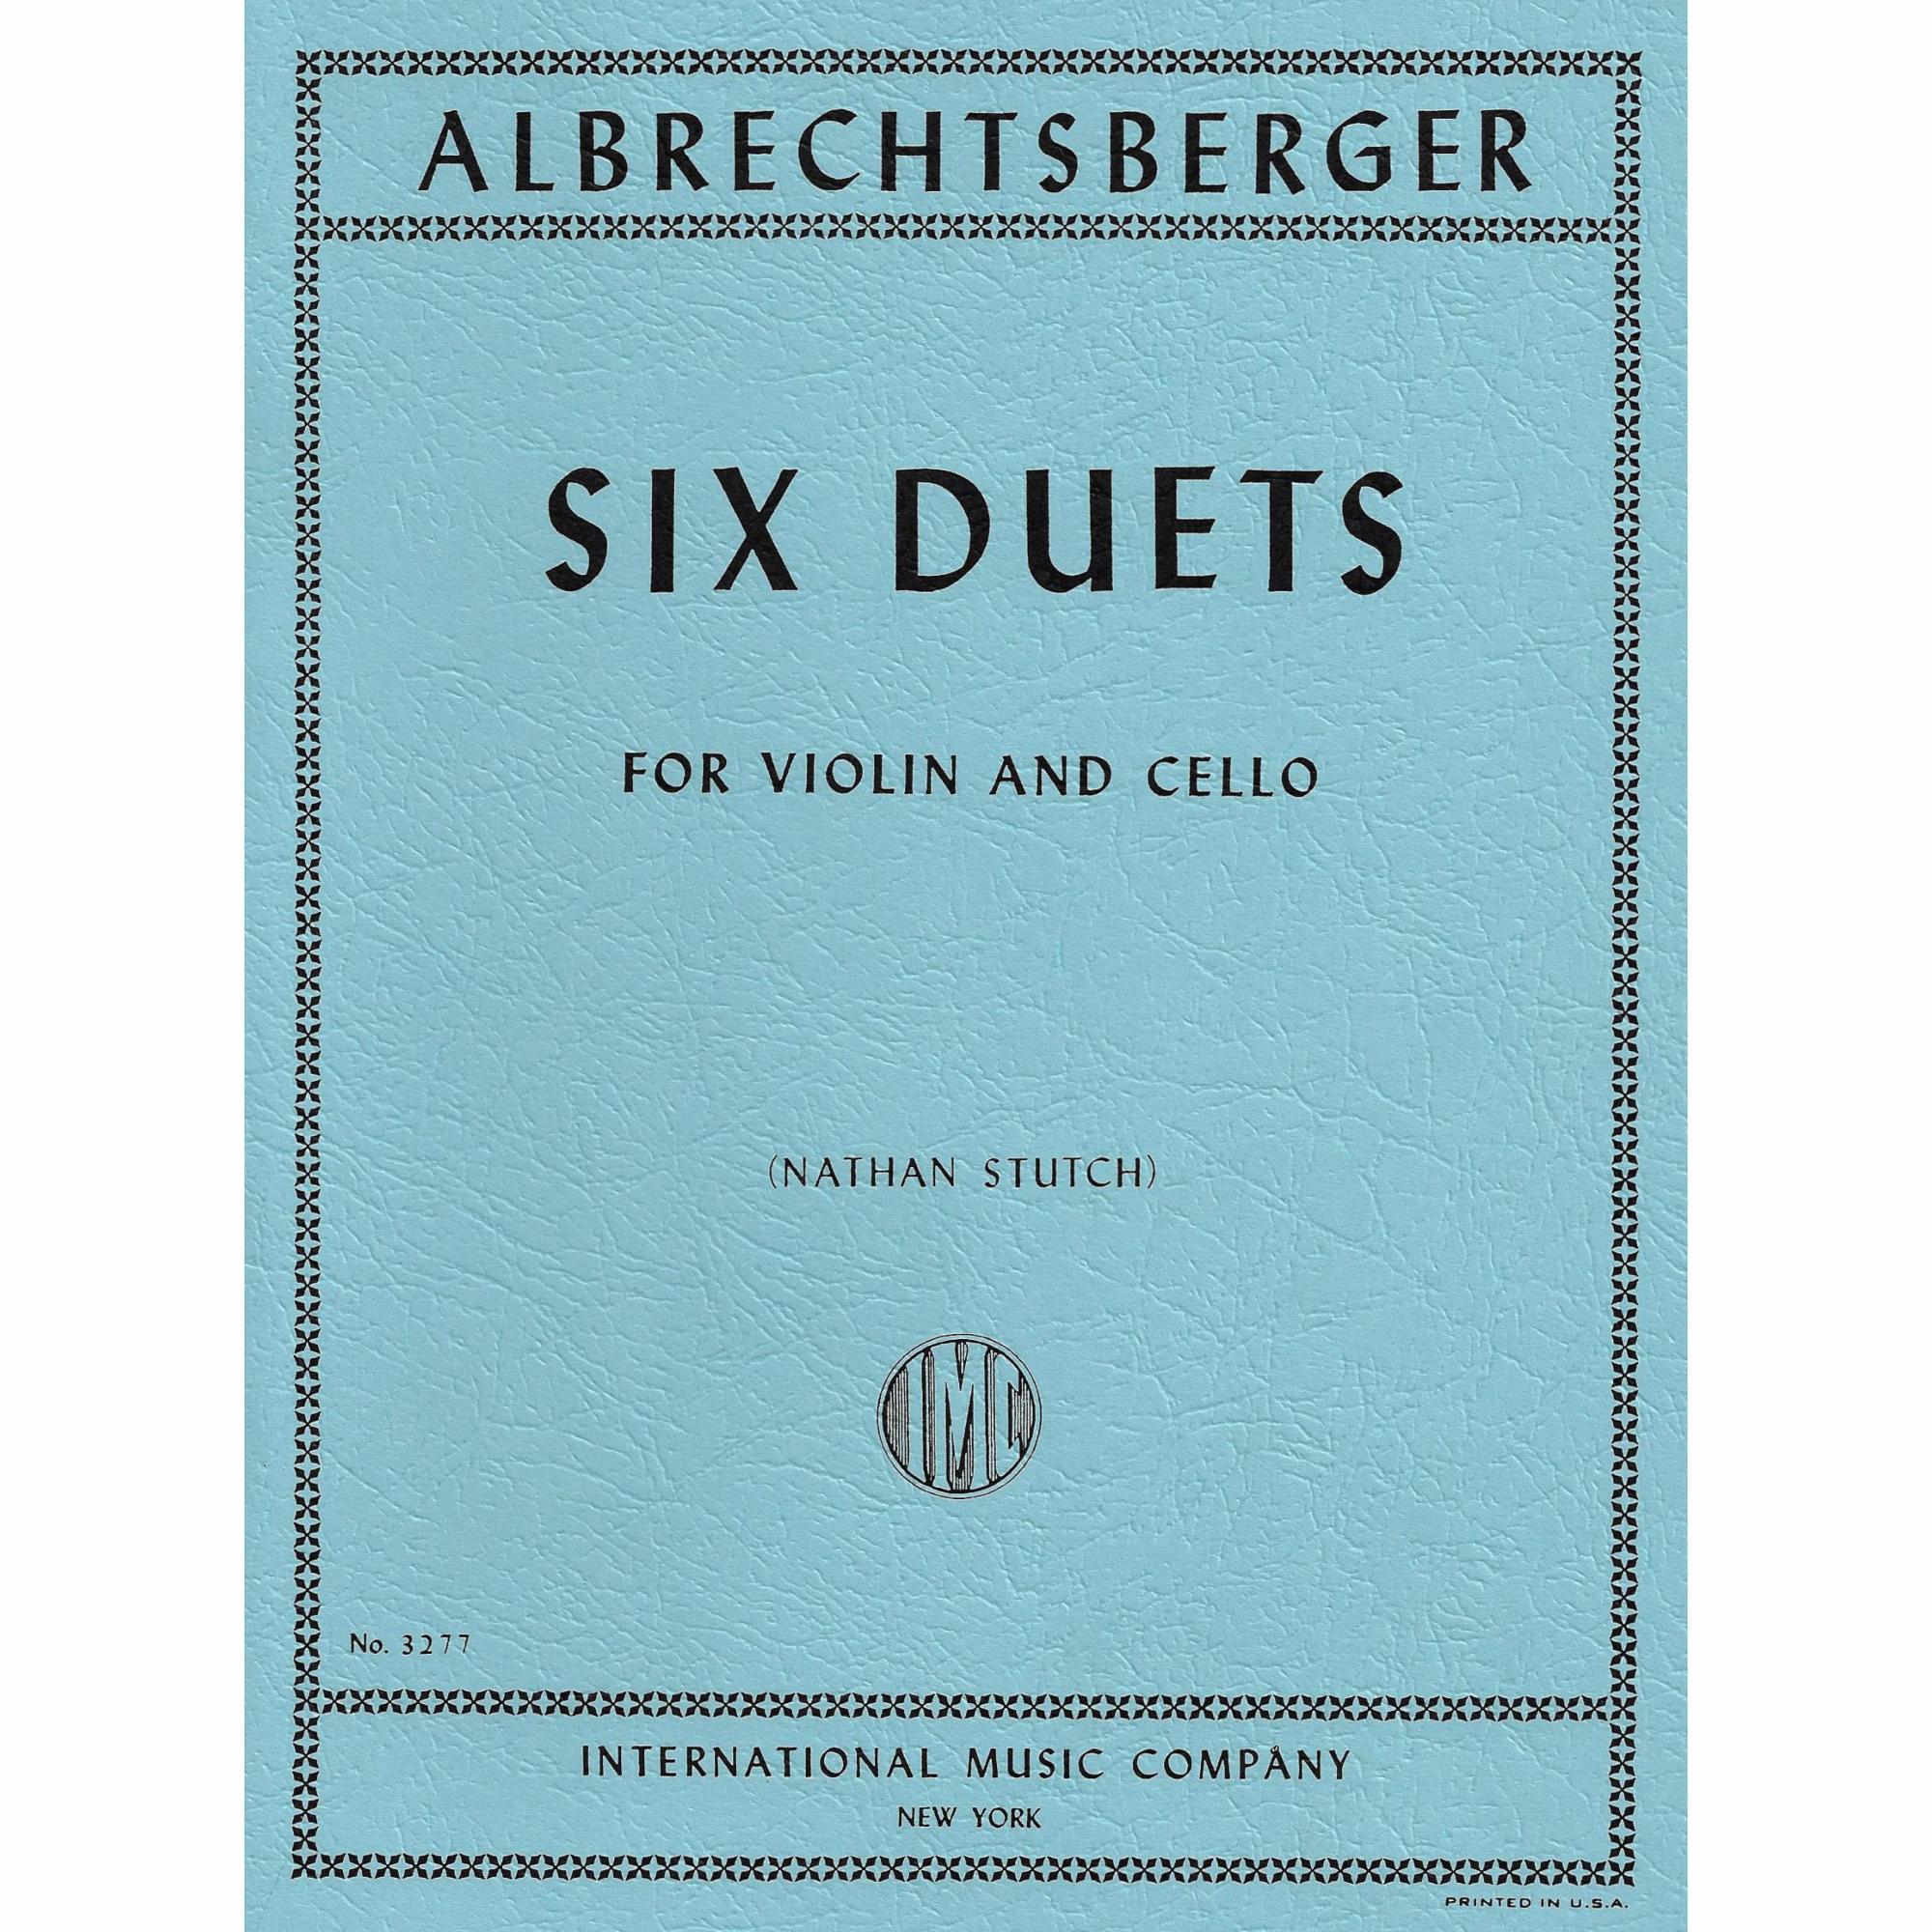 Albrechtsberger -- Six Duets for Violin and Cello